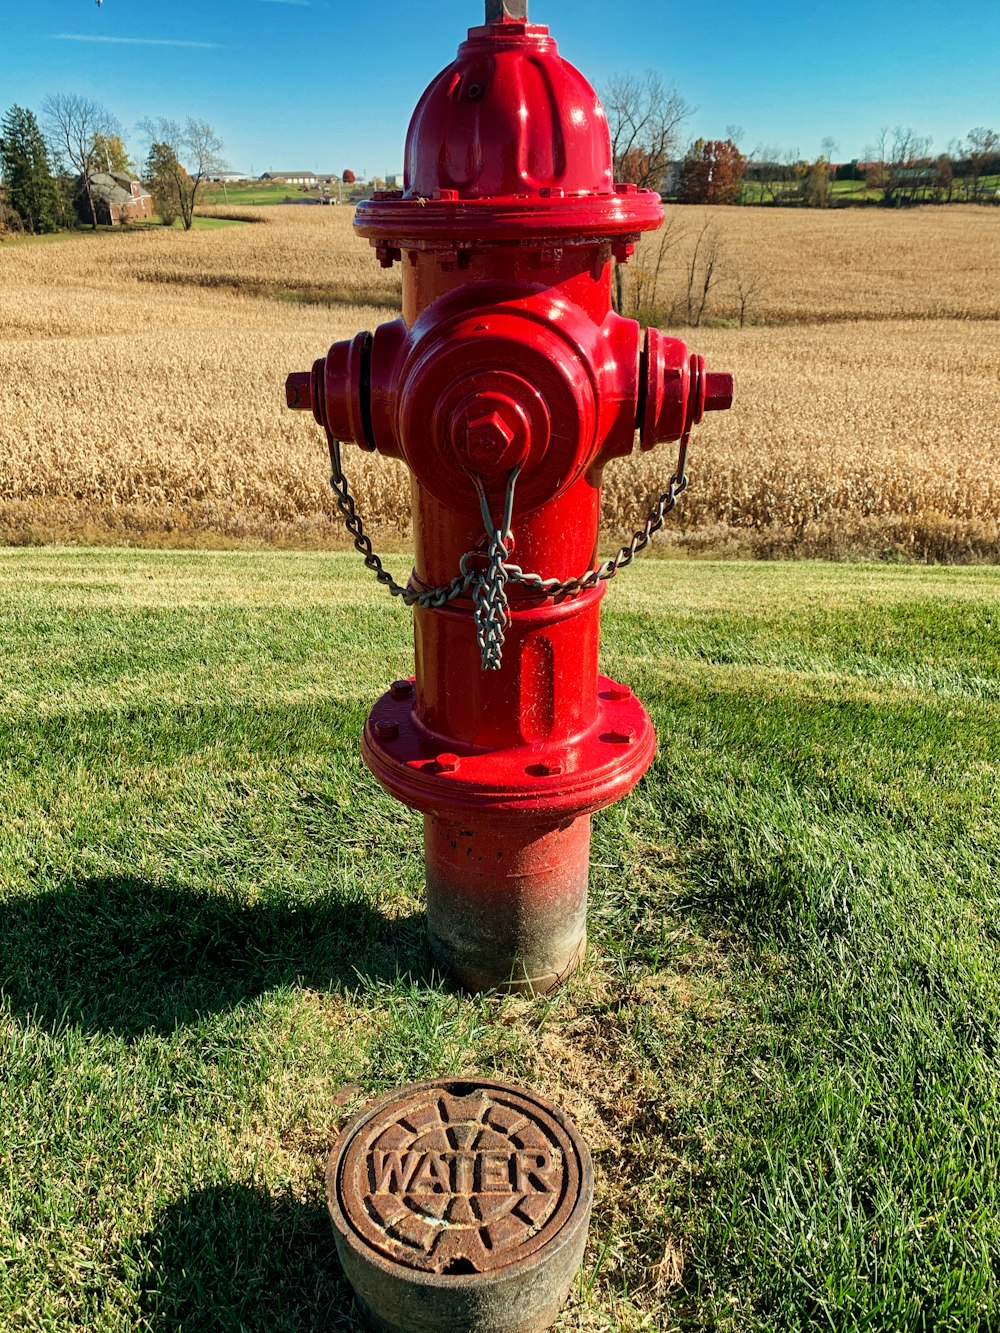 a red fire hydrant